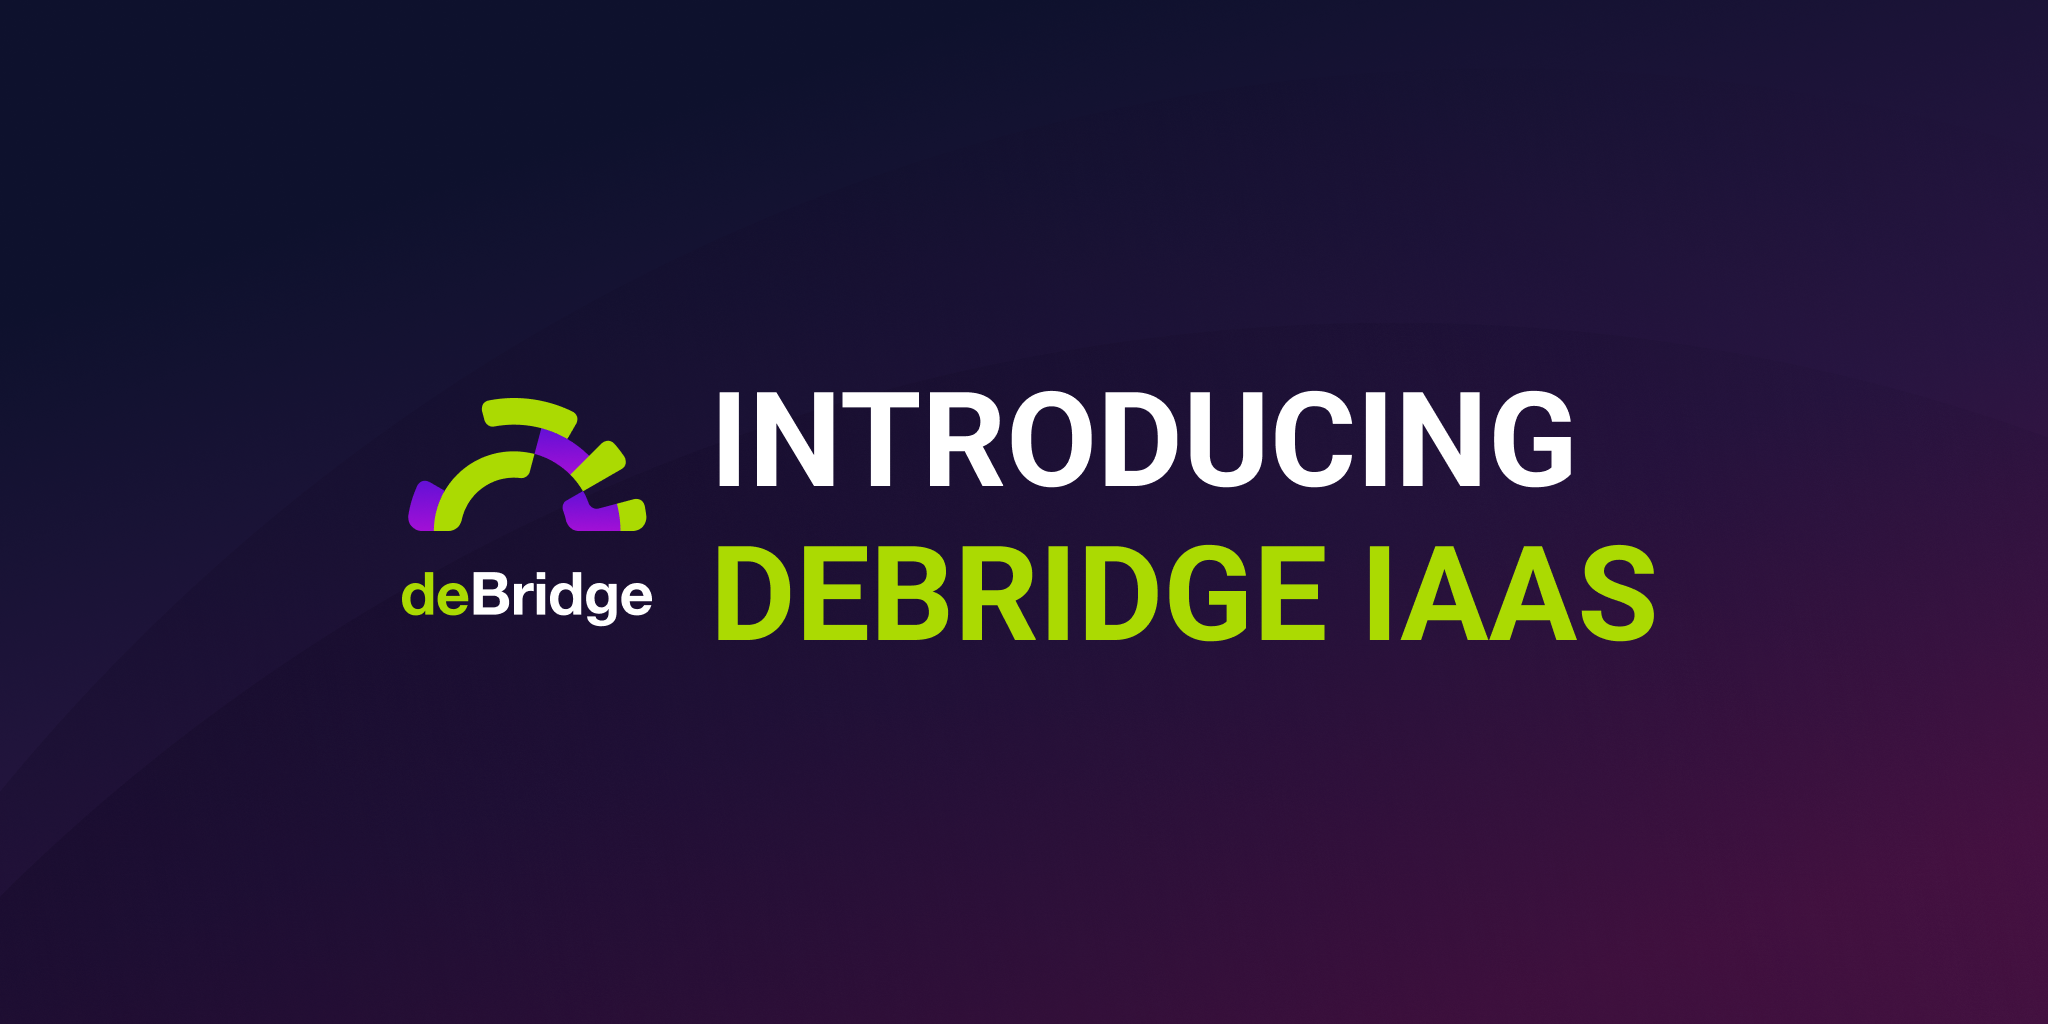 Introducing deBridge IaaS, a turnkey solution for EVM & SVM cross-chain interoperability with Neon Labs as first partner